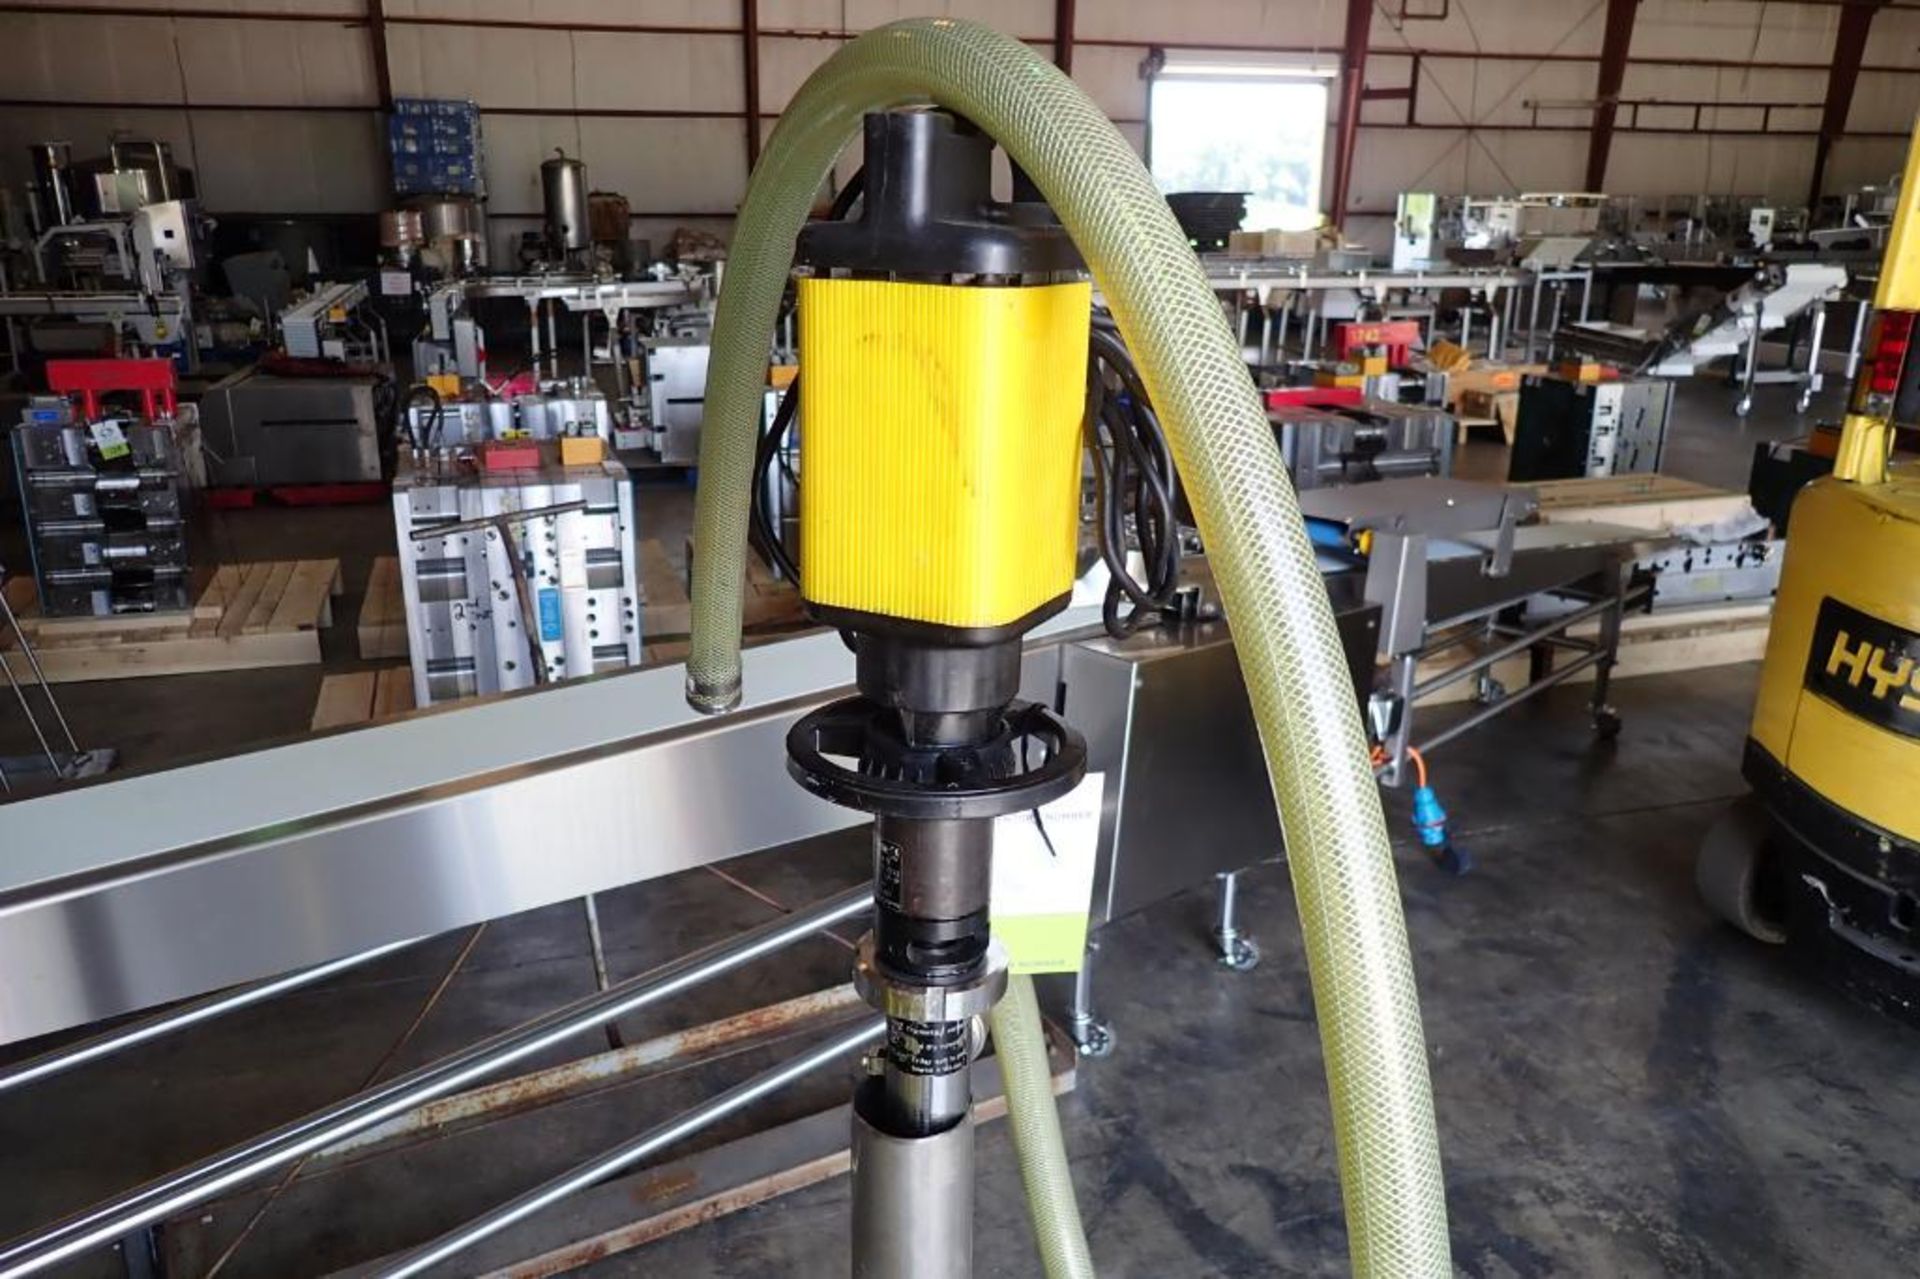 Lutz barrel pump, Model B70, SN 74144 00713, with SS stand { Rigging Fee: $25} - Image 2 of 6